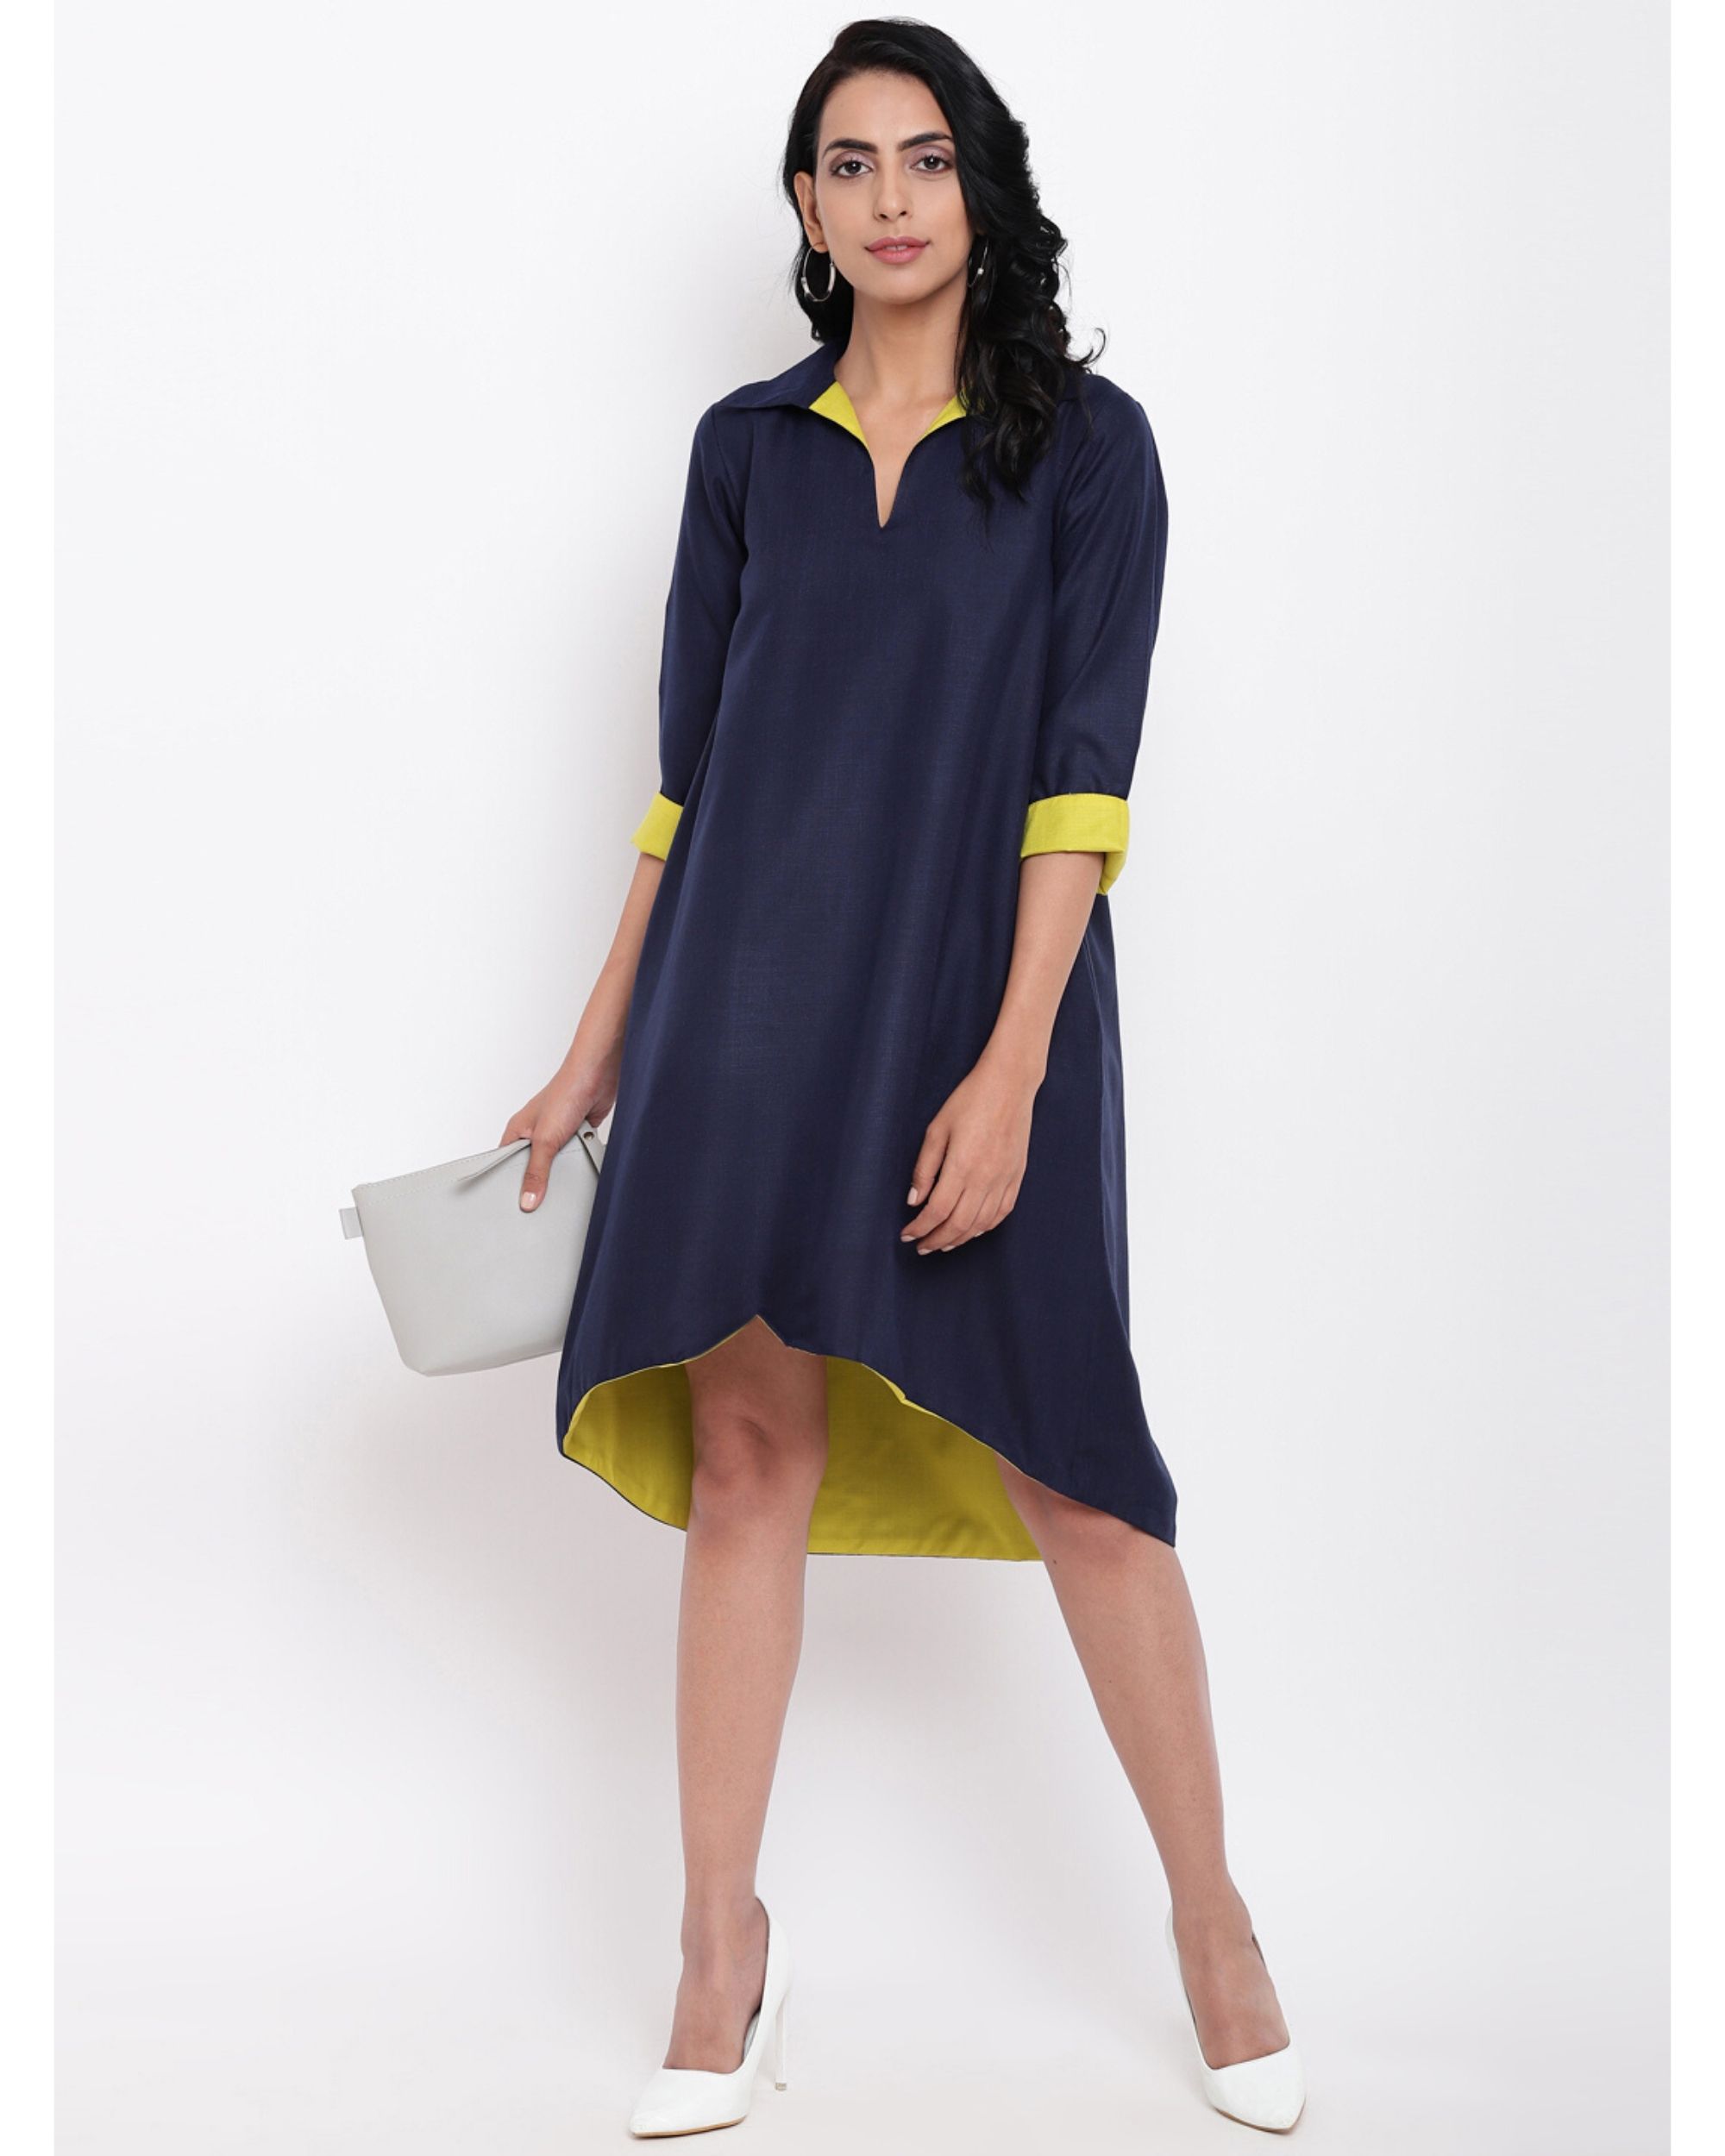 Navy blue and chartreuse yellow collared dress by trueBrowns | The ...